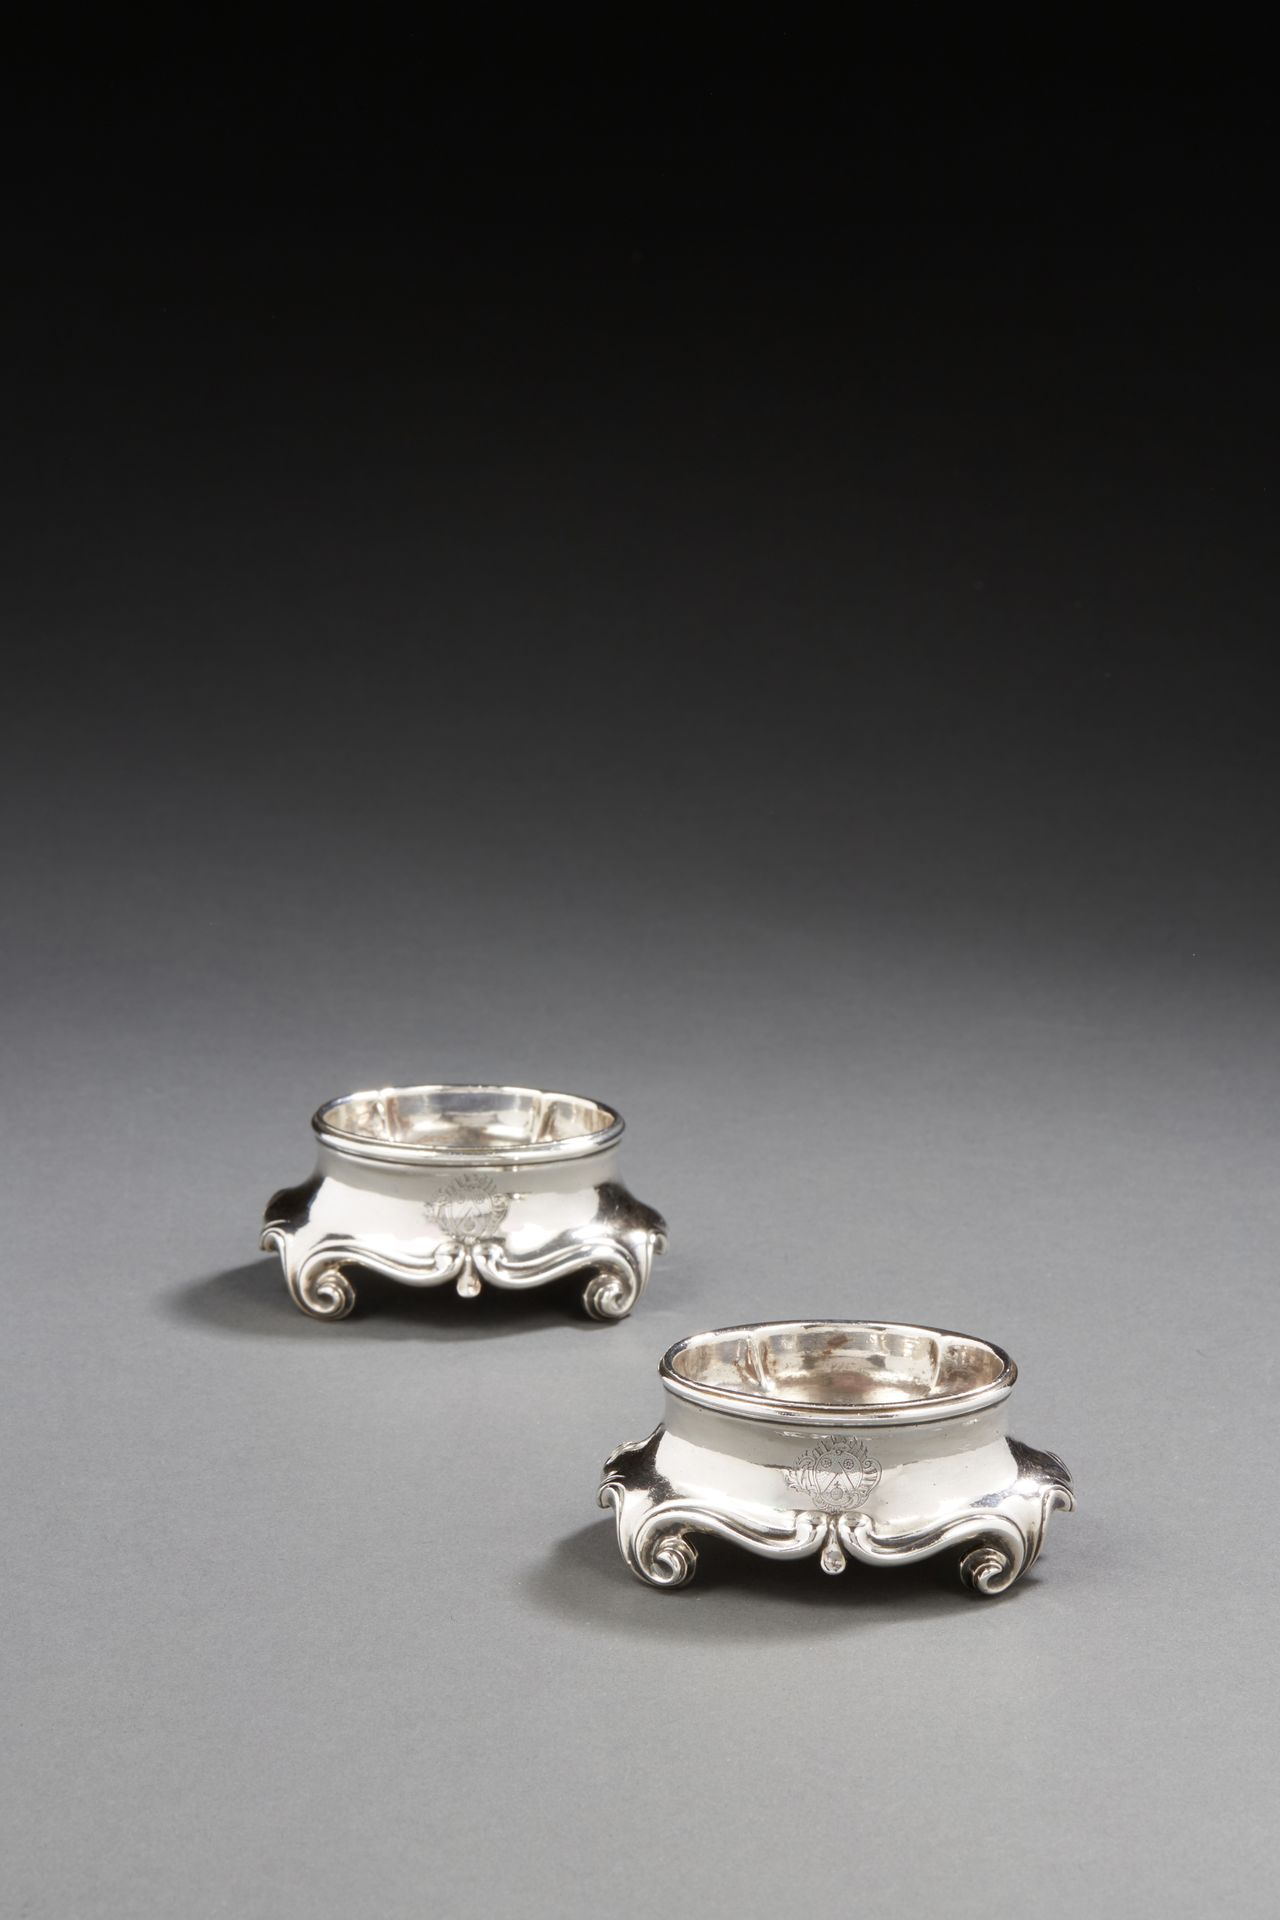 Null TOULOUSE 1757
Pair of saltcellars in melted silver, oval shape, standing on&hellip;